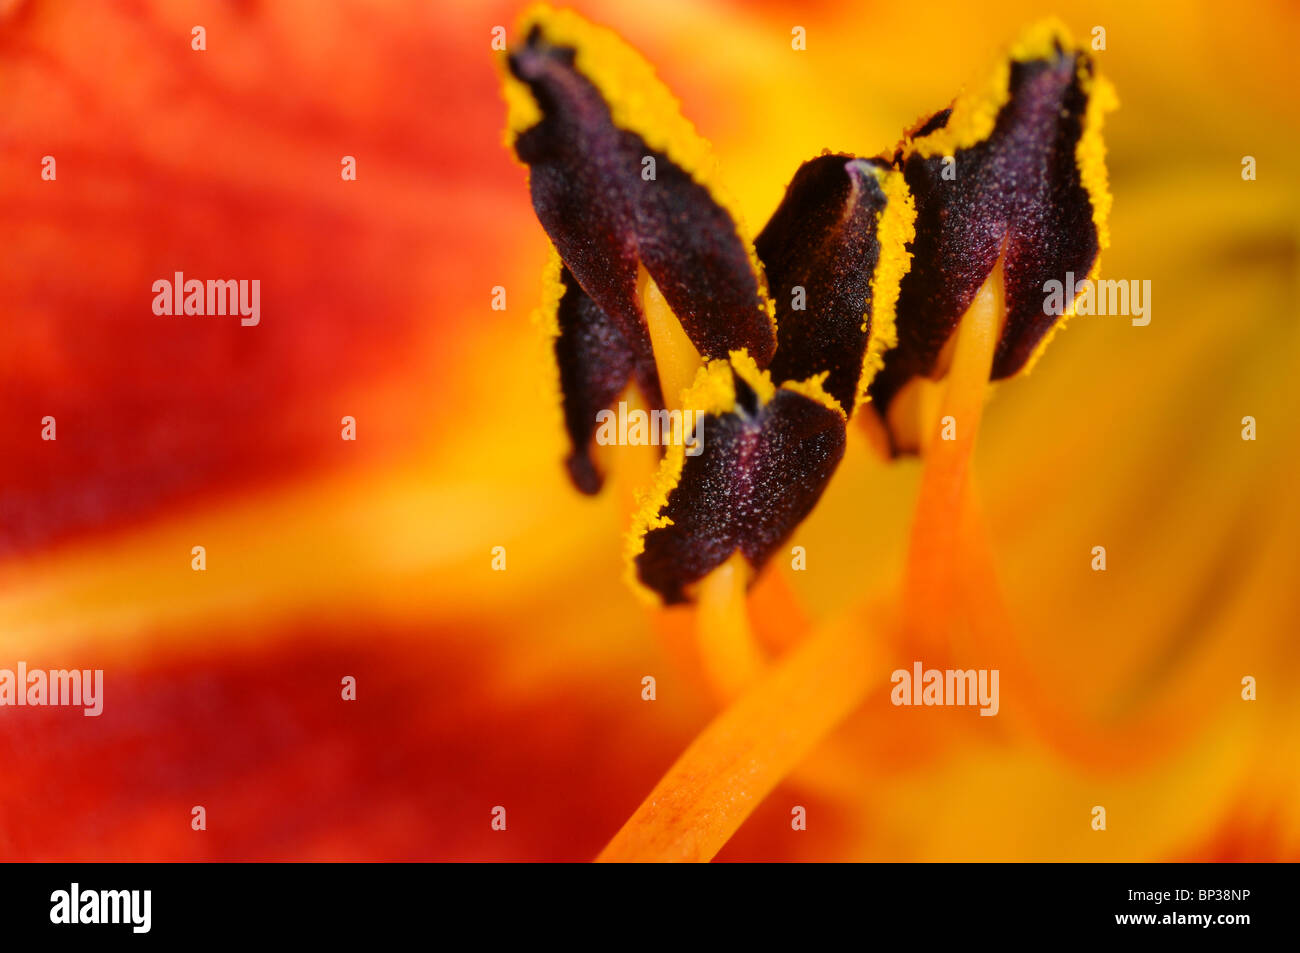 Extreme close up of the pollen covered anthers on a day lily (hemerocallis) flower. Stock Photo